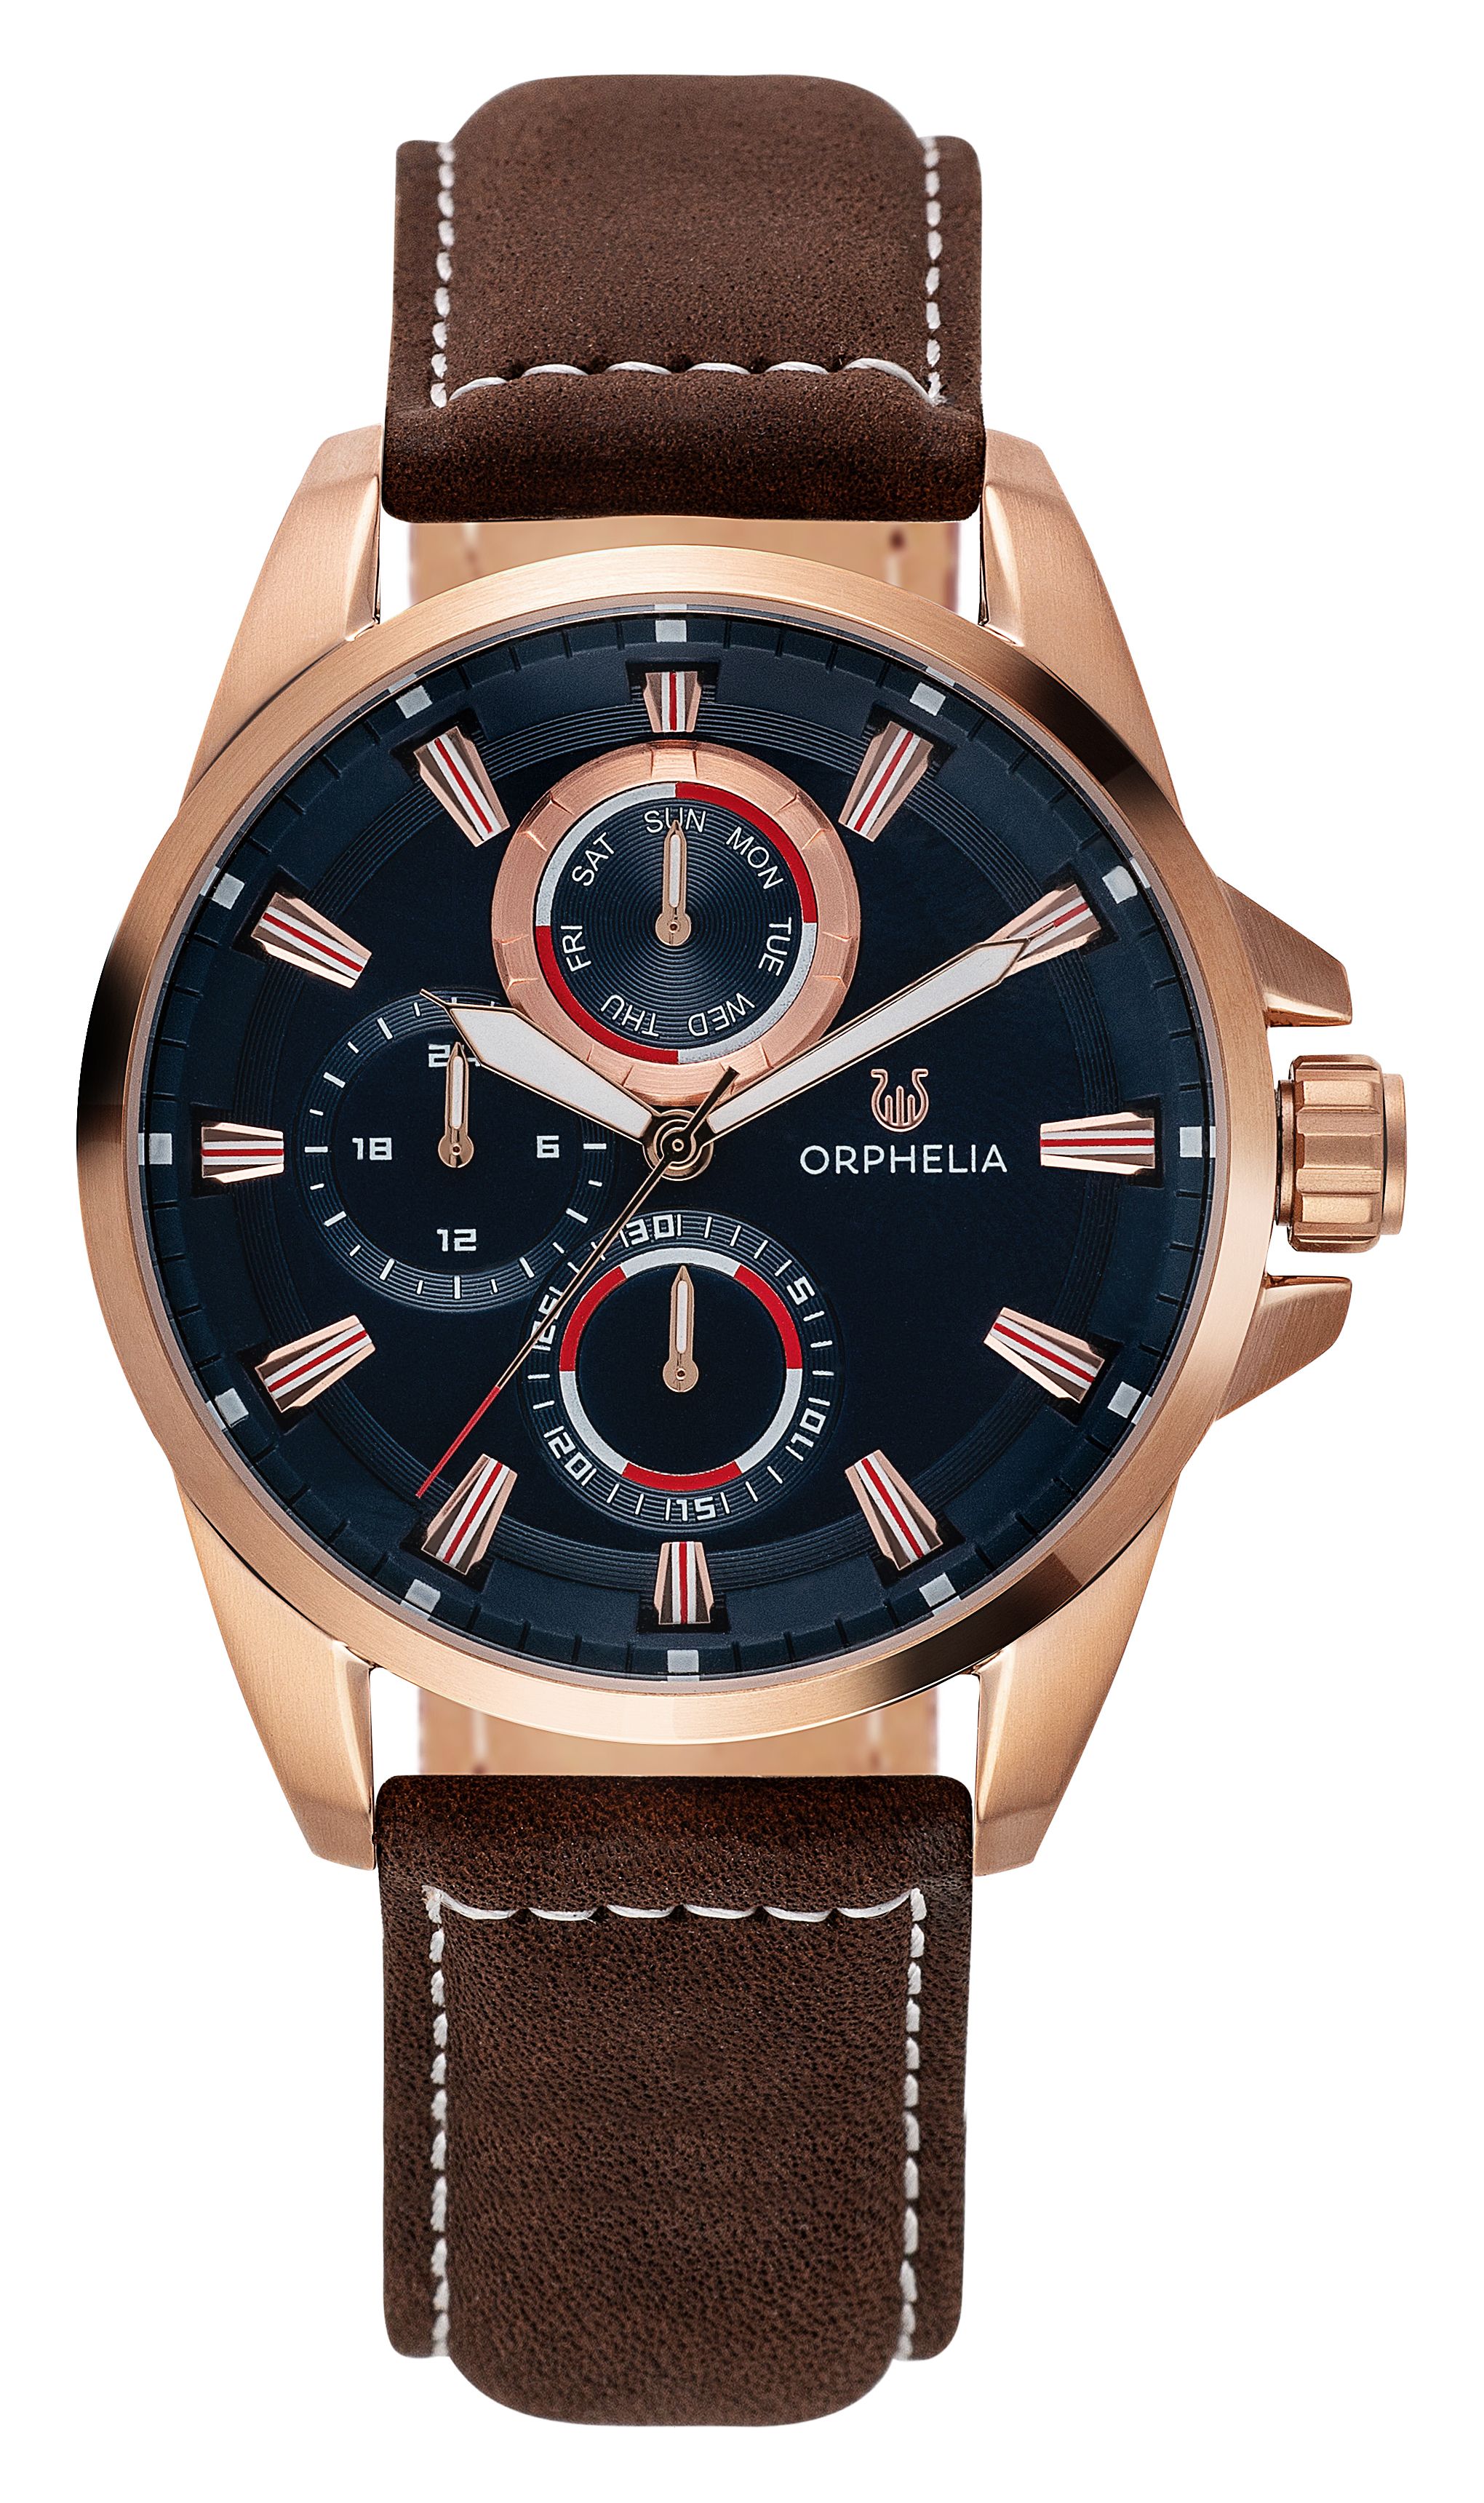 This Orphelia Eddington Multi Dial Watch for Men is the perfect timepiece to wear or to gift. It's Rose Gold 44 mm Round case combined with the comfortable Brown Genuine Leather watch band will ensure you enjoy this stunning timepiece without any compromise. Operated by a high quality Quartz movement and water resistant to 3 bars, your watch will keep ticking. SOPHISTICATED DESIGN: ORPHELIA Eddington Multi dial watch with a Miyota Quartz movement includes a Date and 24-hour display and has an expensive leather strap. This watch features Luminous Hands & Numerals. Wear this Special designed watch daily as a polished yet functional finish PREMIUM QUALITY: By using high-quality materials  Glass: Mineral Glass  Case material: Stainless steel  Bracelet material: Leather - Water resistant: 3 bars COMPACT SIZE: Case diameter: 44 mm  Height: 12 mm  Strap- Length: 22 cm  Width: 20 mm. Due to this practical handy size  the watch is absolutely for everyday use-Weight: 88 g